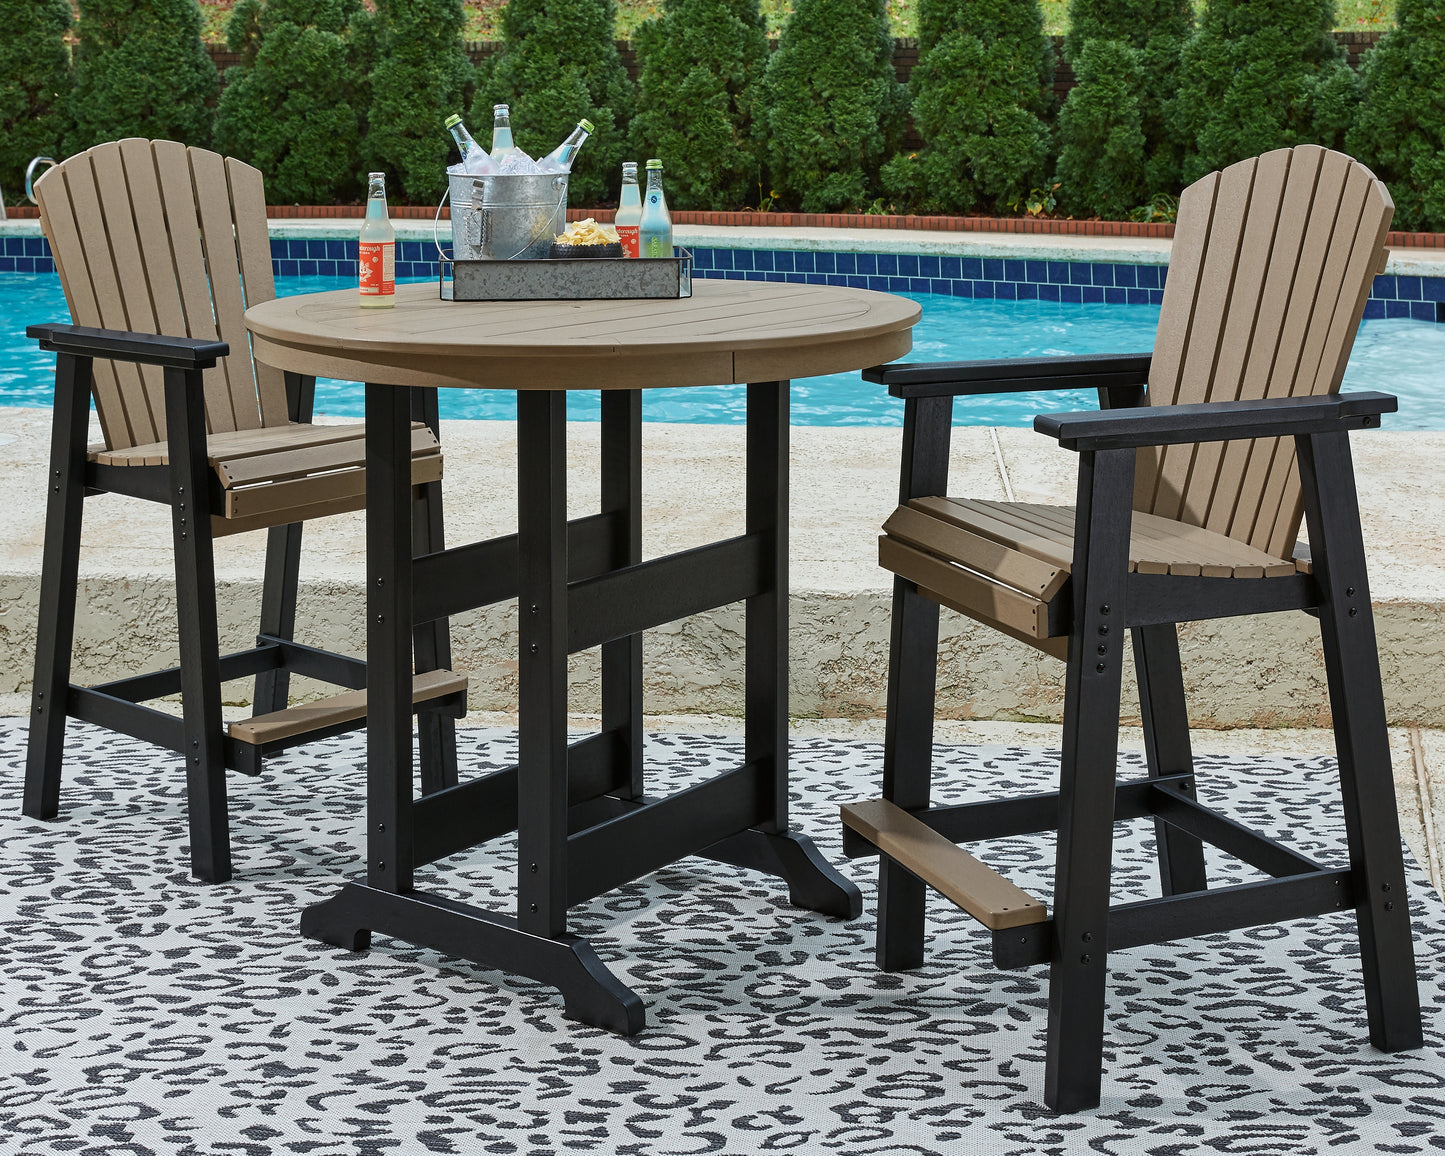 Fairen Trail Outdoor Counter Height Dining Table with 2 Barstools